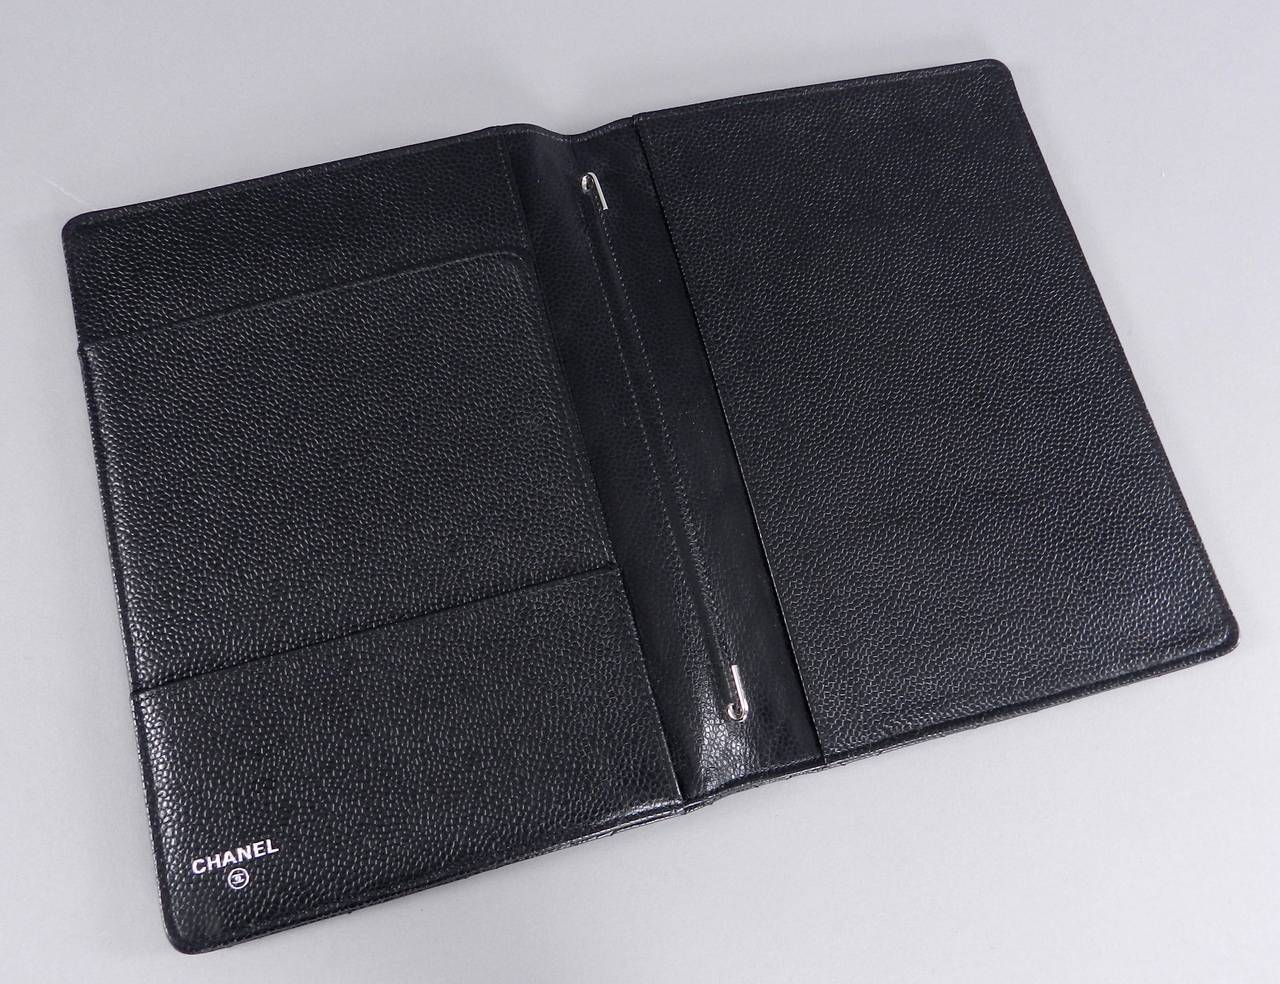 Chanel Caviar Leather Agenda / Business Day Planner Cover at 1stdibs